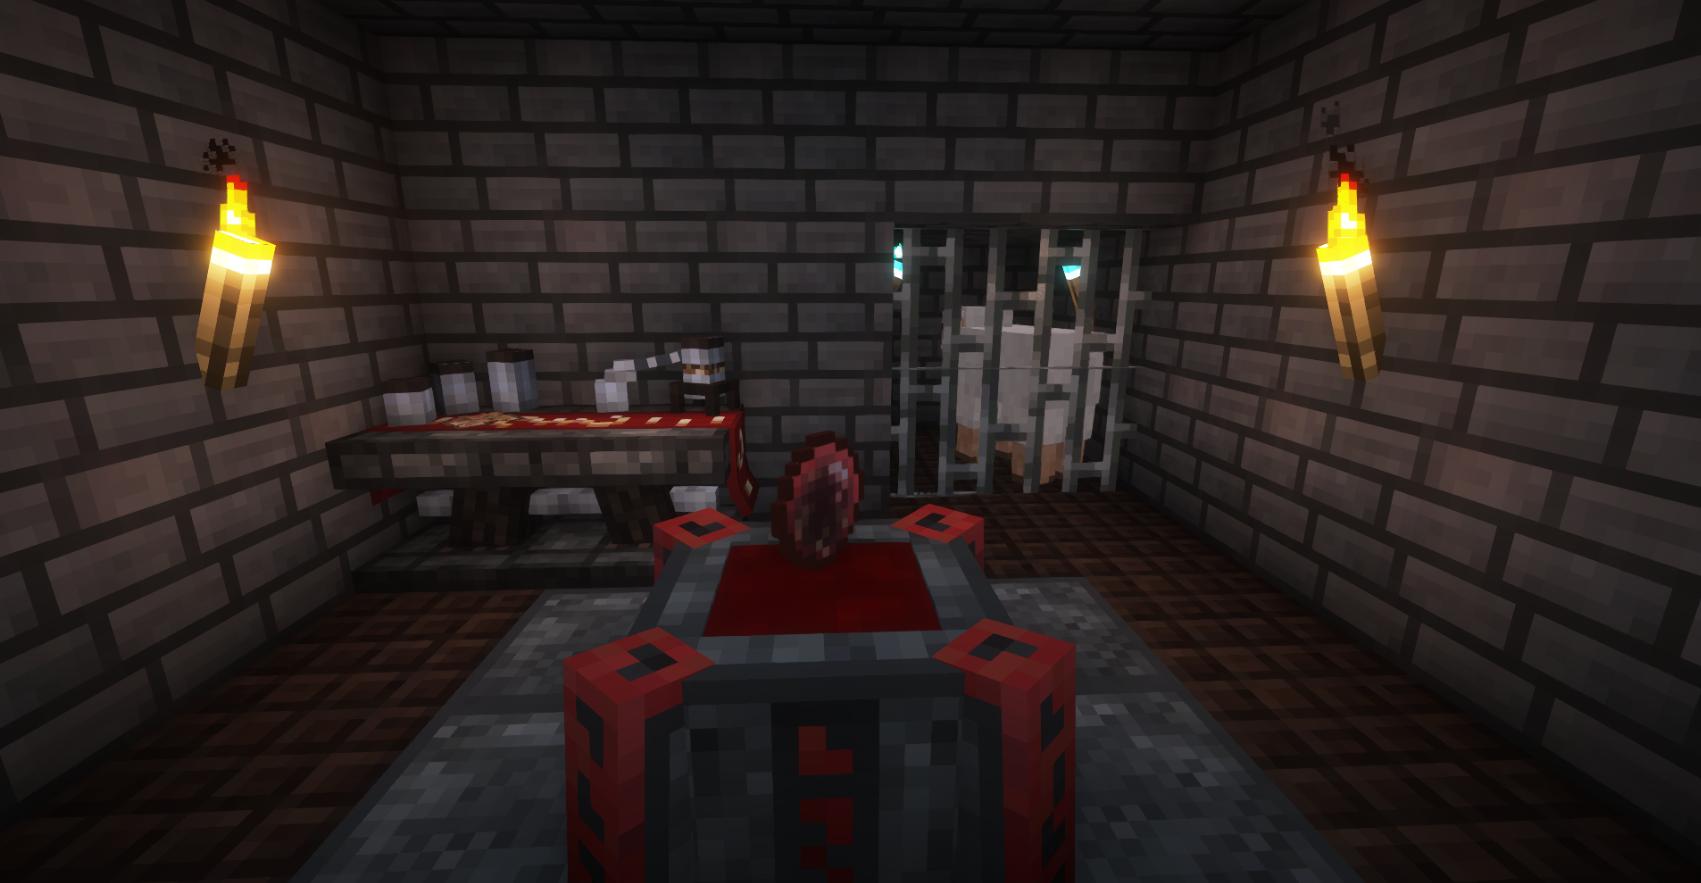 Dark room with blood altar in the middle. Behind it are alchemy table and sacrficial lamb